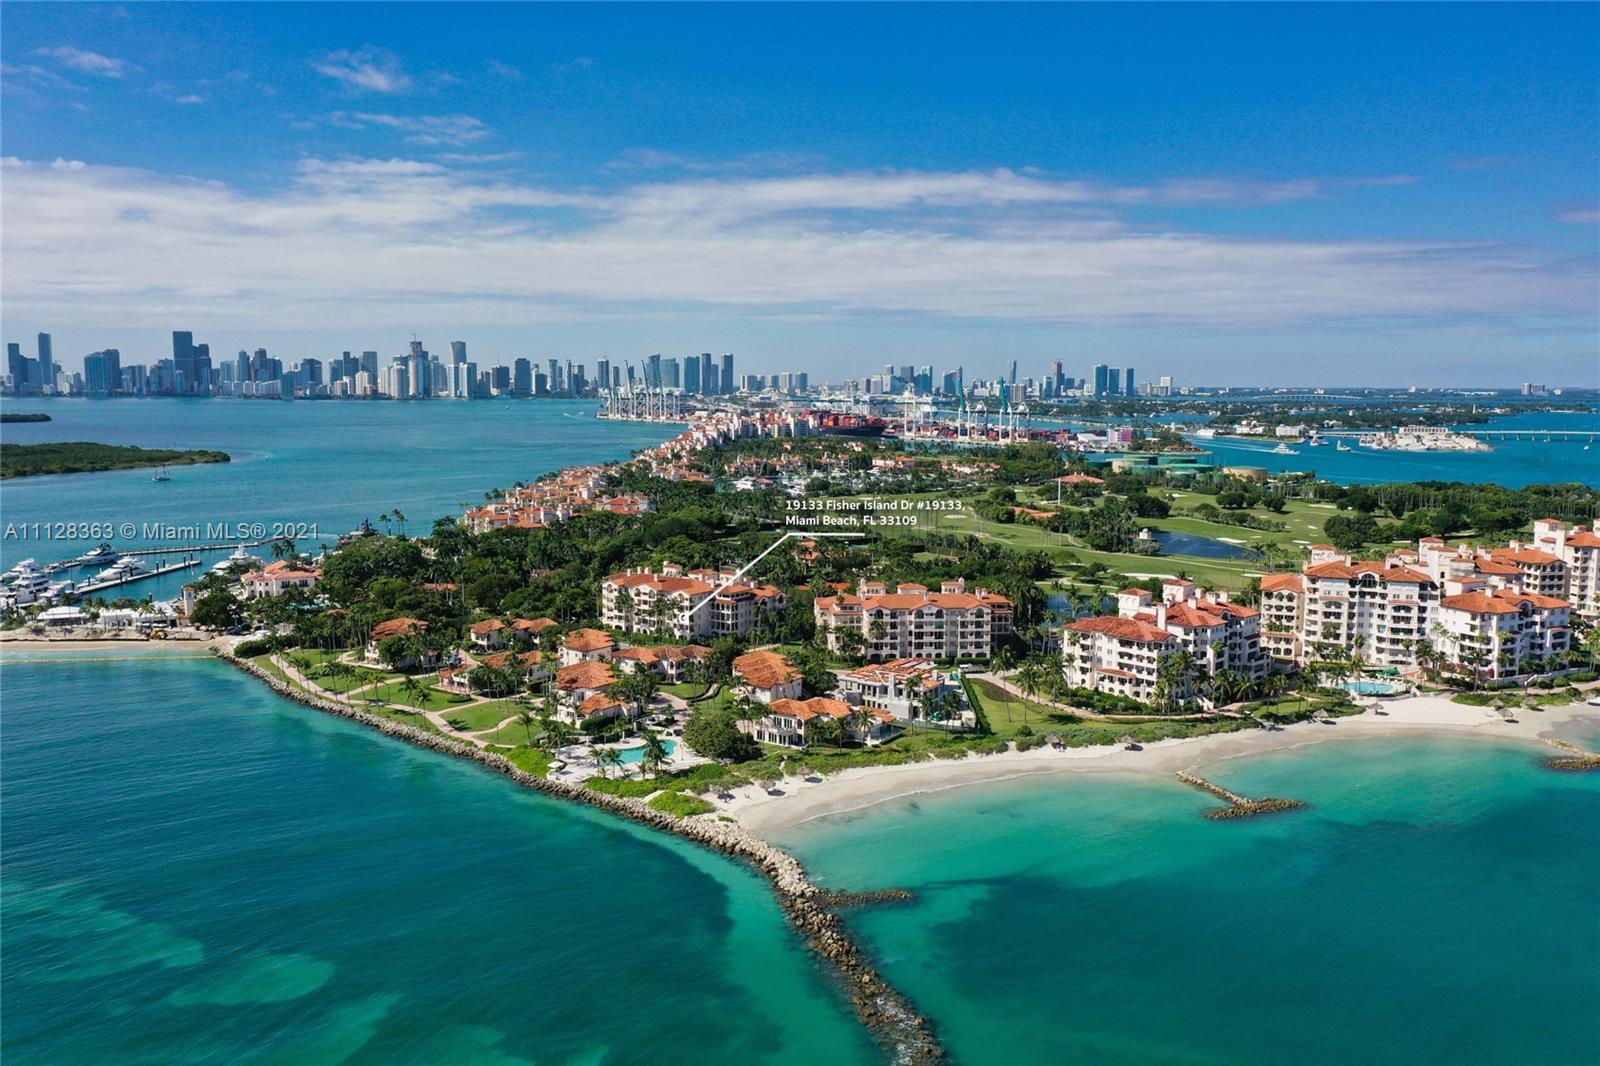 19133  Fisher Island Dr